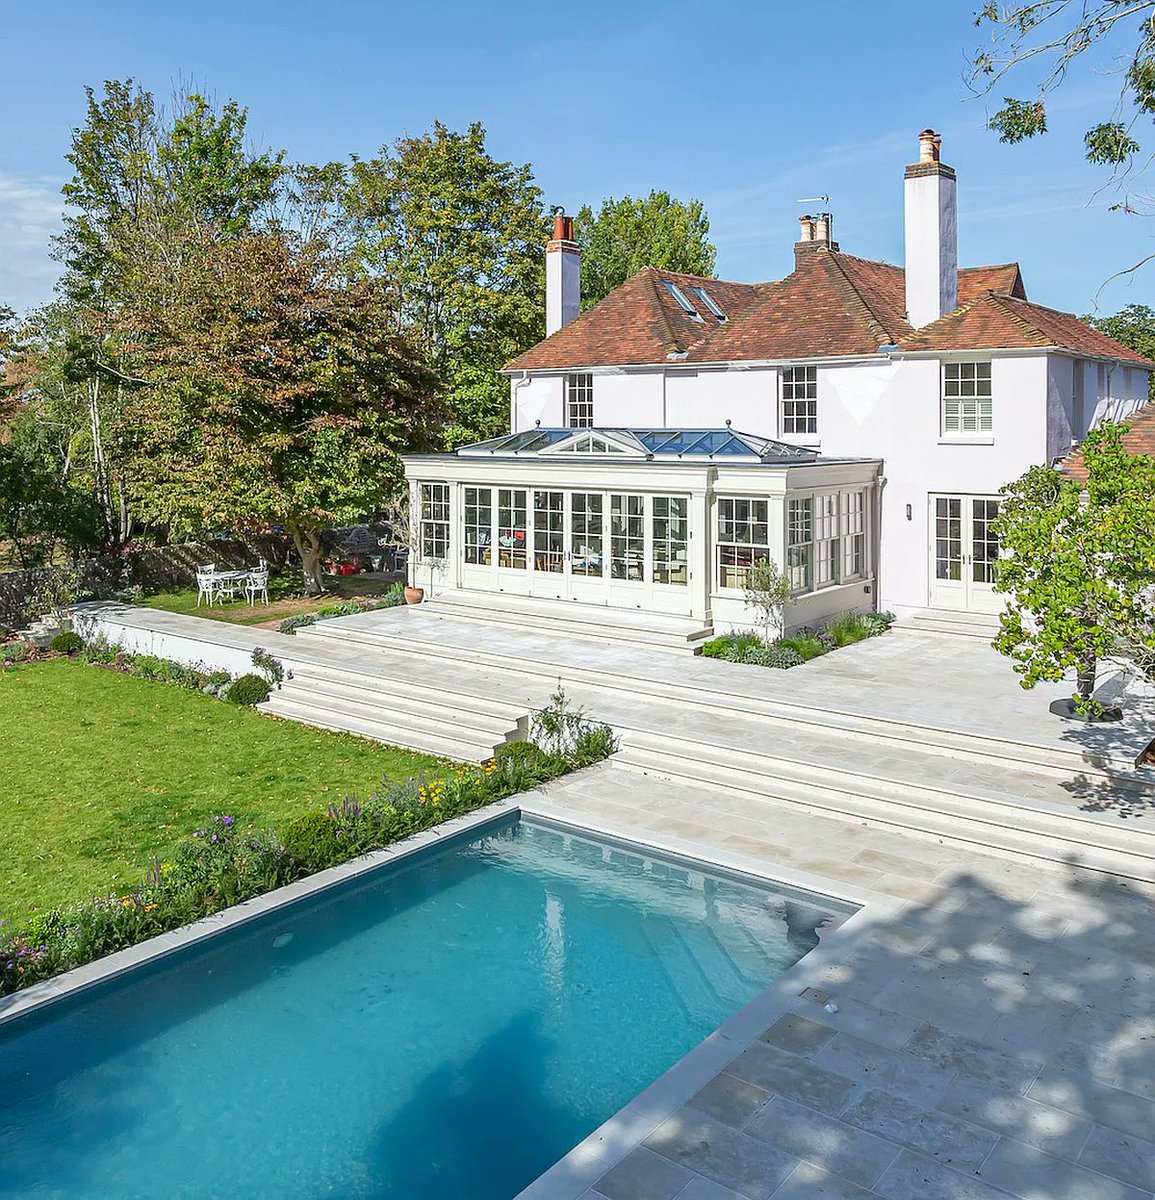 Orangery with Pool Views 🏊

This beautifully designed orangery provides views across the freshly landscaped garden and an inviting looking swimming pool, at this Grade II listed property in East Sussex🌞

#listedbuilding #swimmingpool #pool